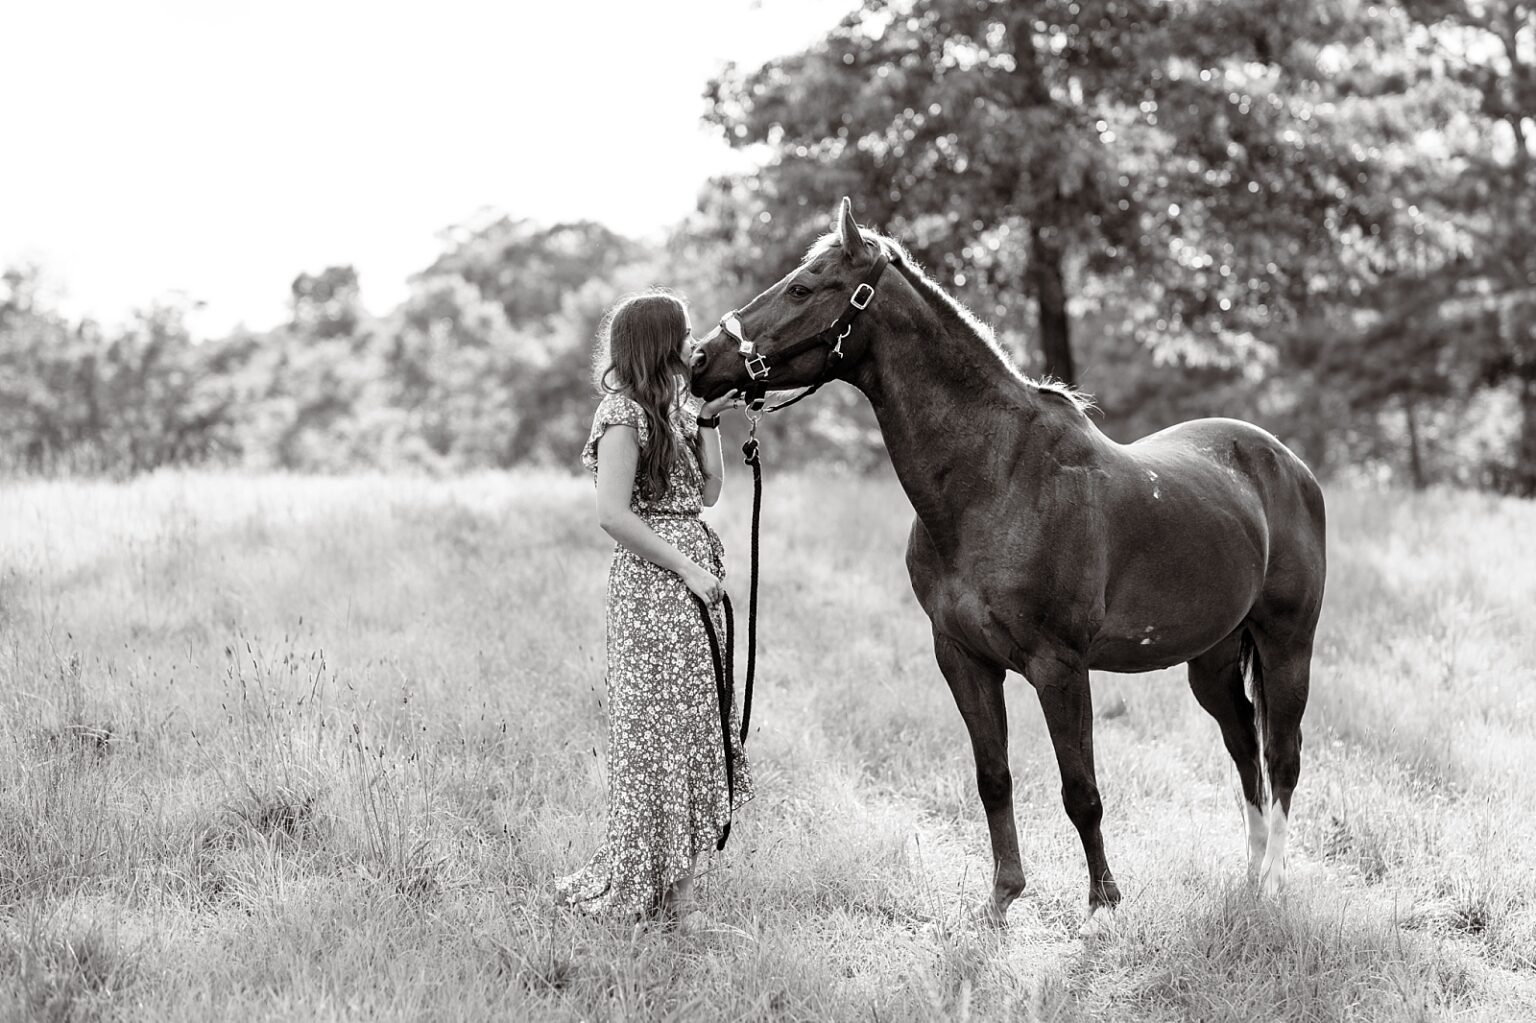 Western horse photographer in Alabama takes photos of barrel racer with her heart horse in floral blue dress.